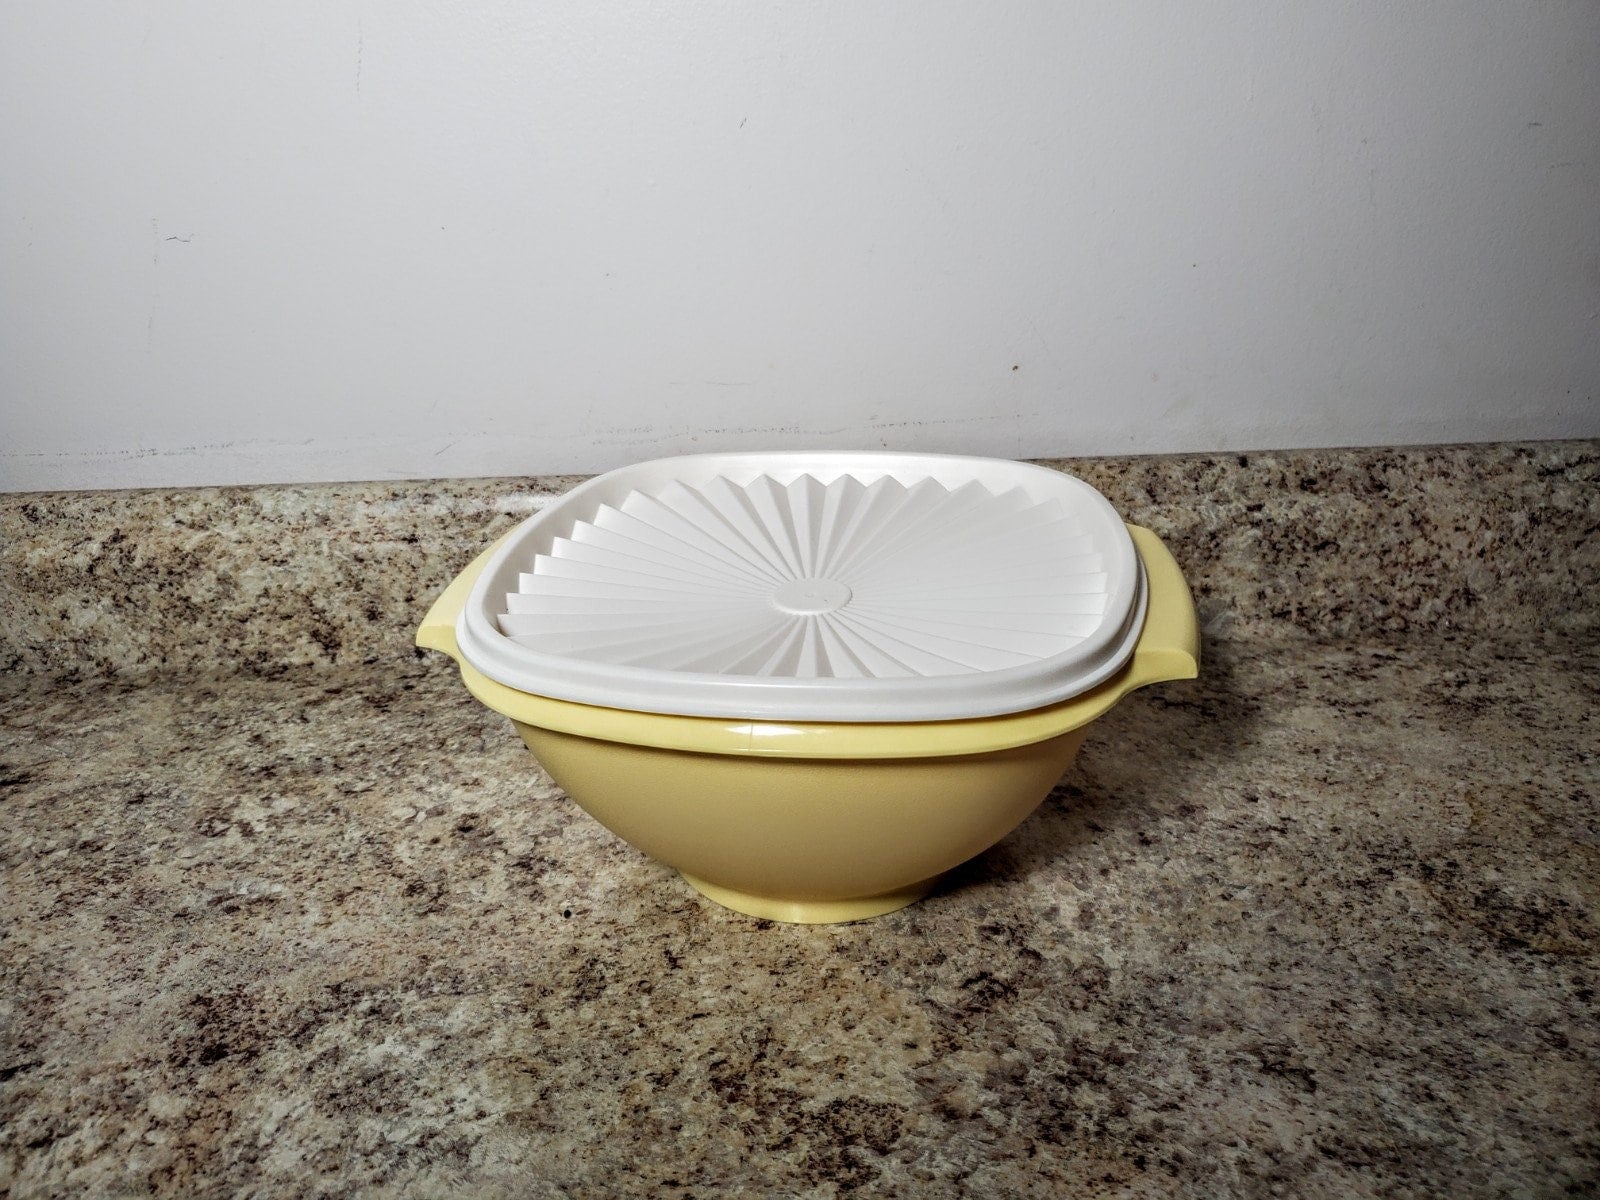 Vintage Tupperware 2.1 Litre 5006 Oval Insulated Microwave Cooker Server